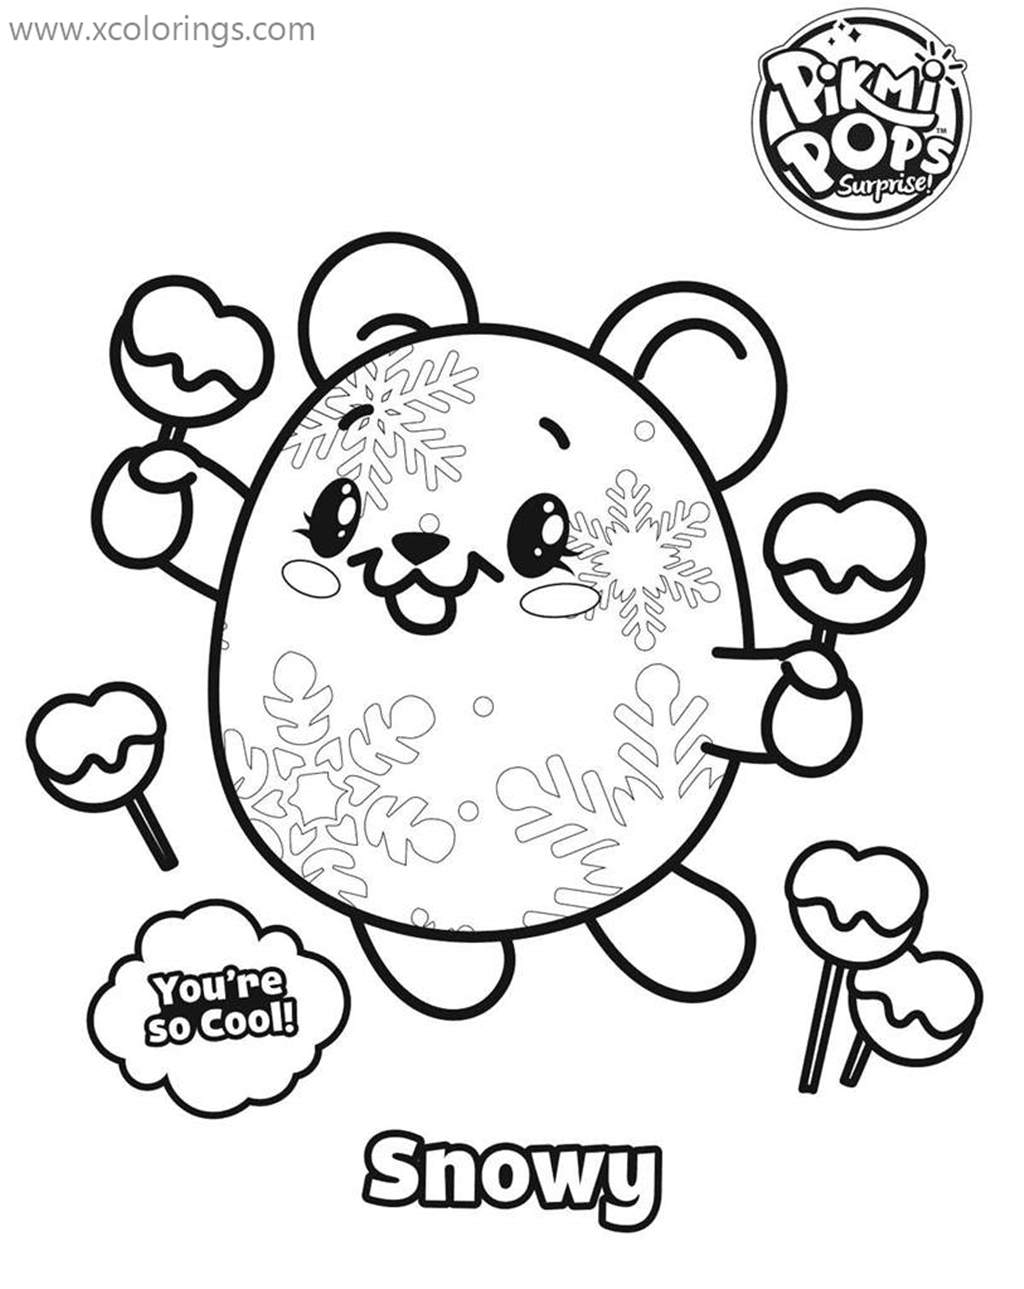 Free Snowy from Pikmi Pops Coloring Pages printable